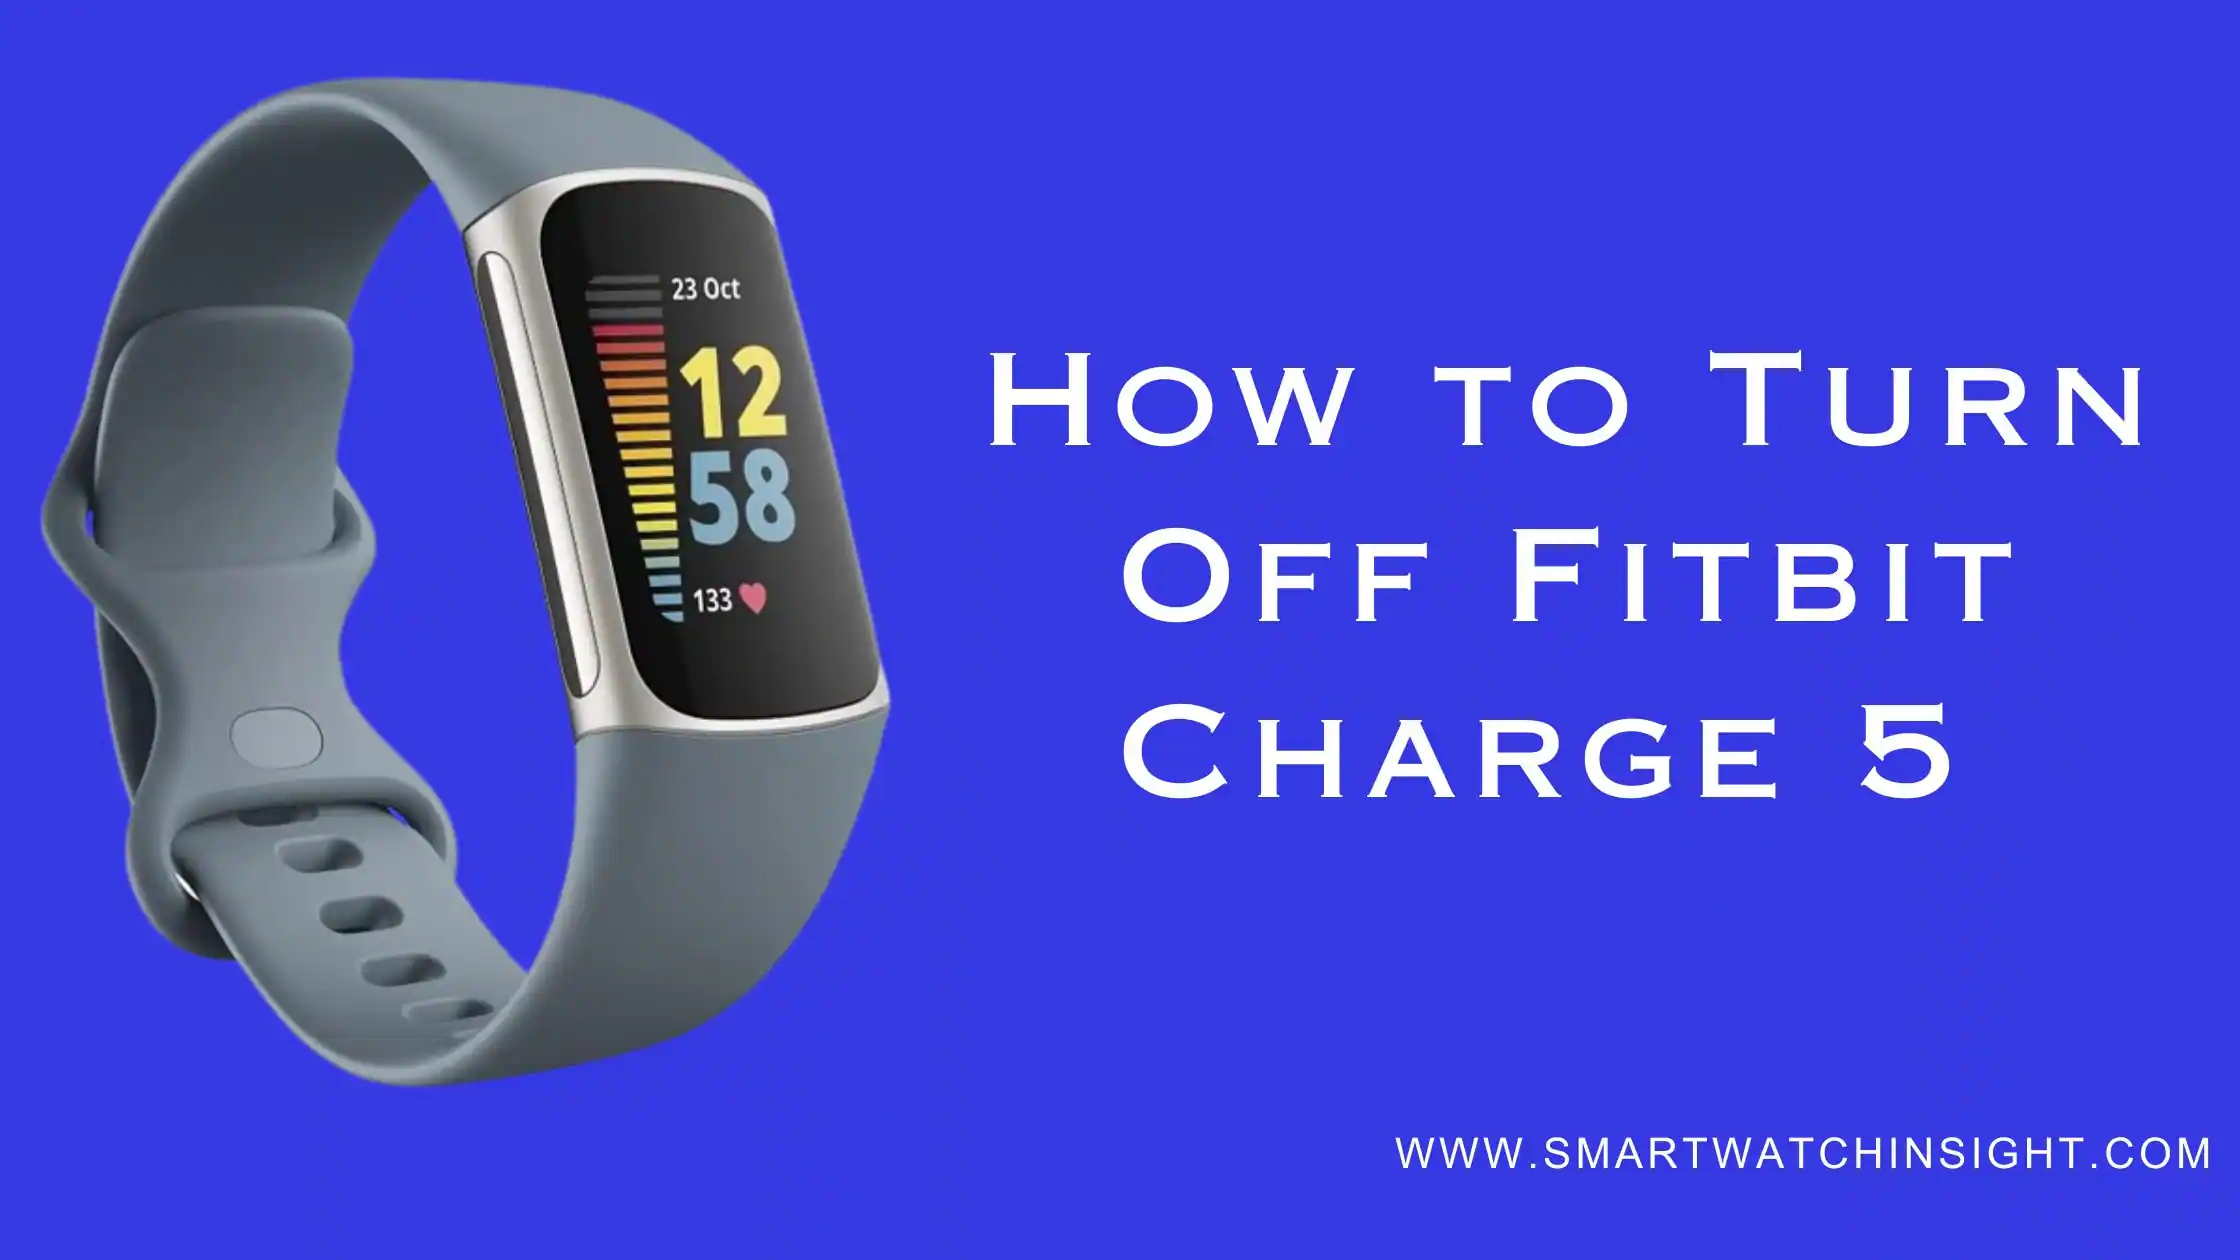 How to Turn Off Fitbit Charge 5